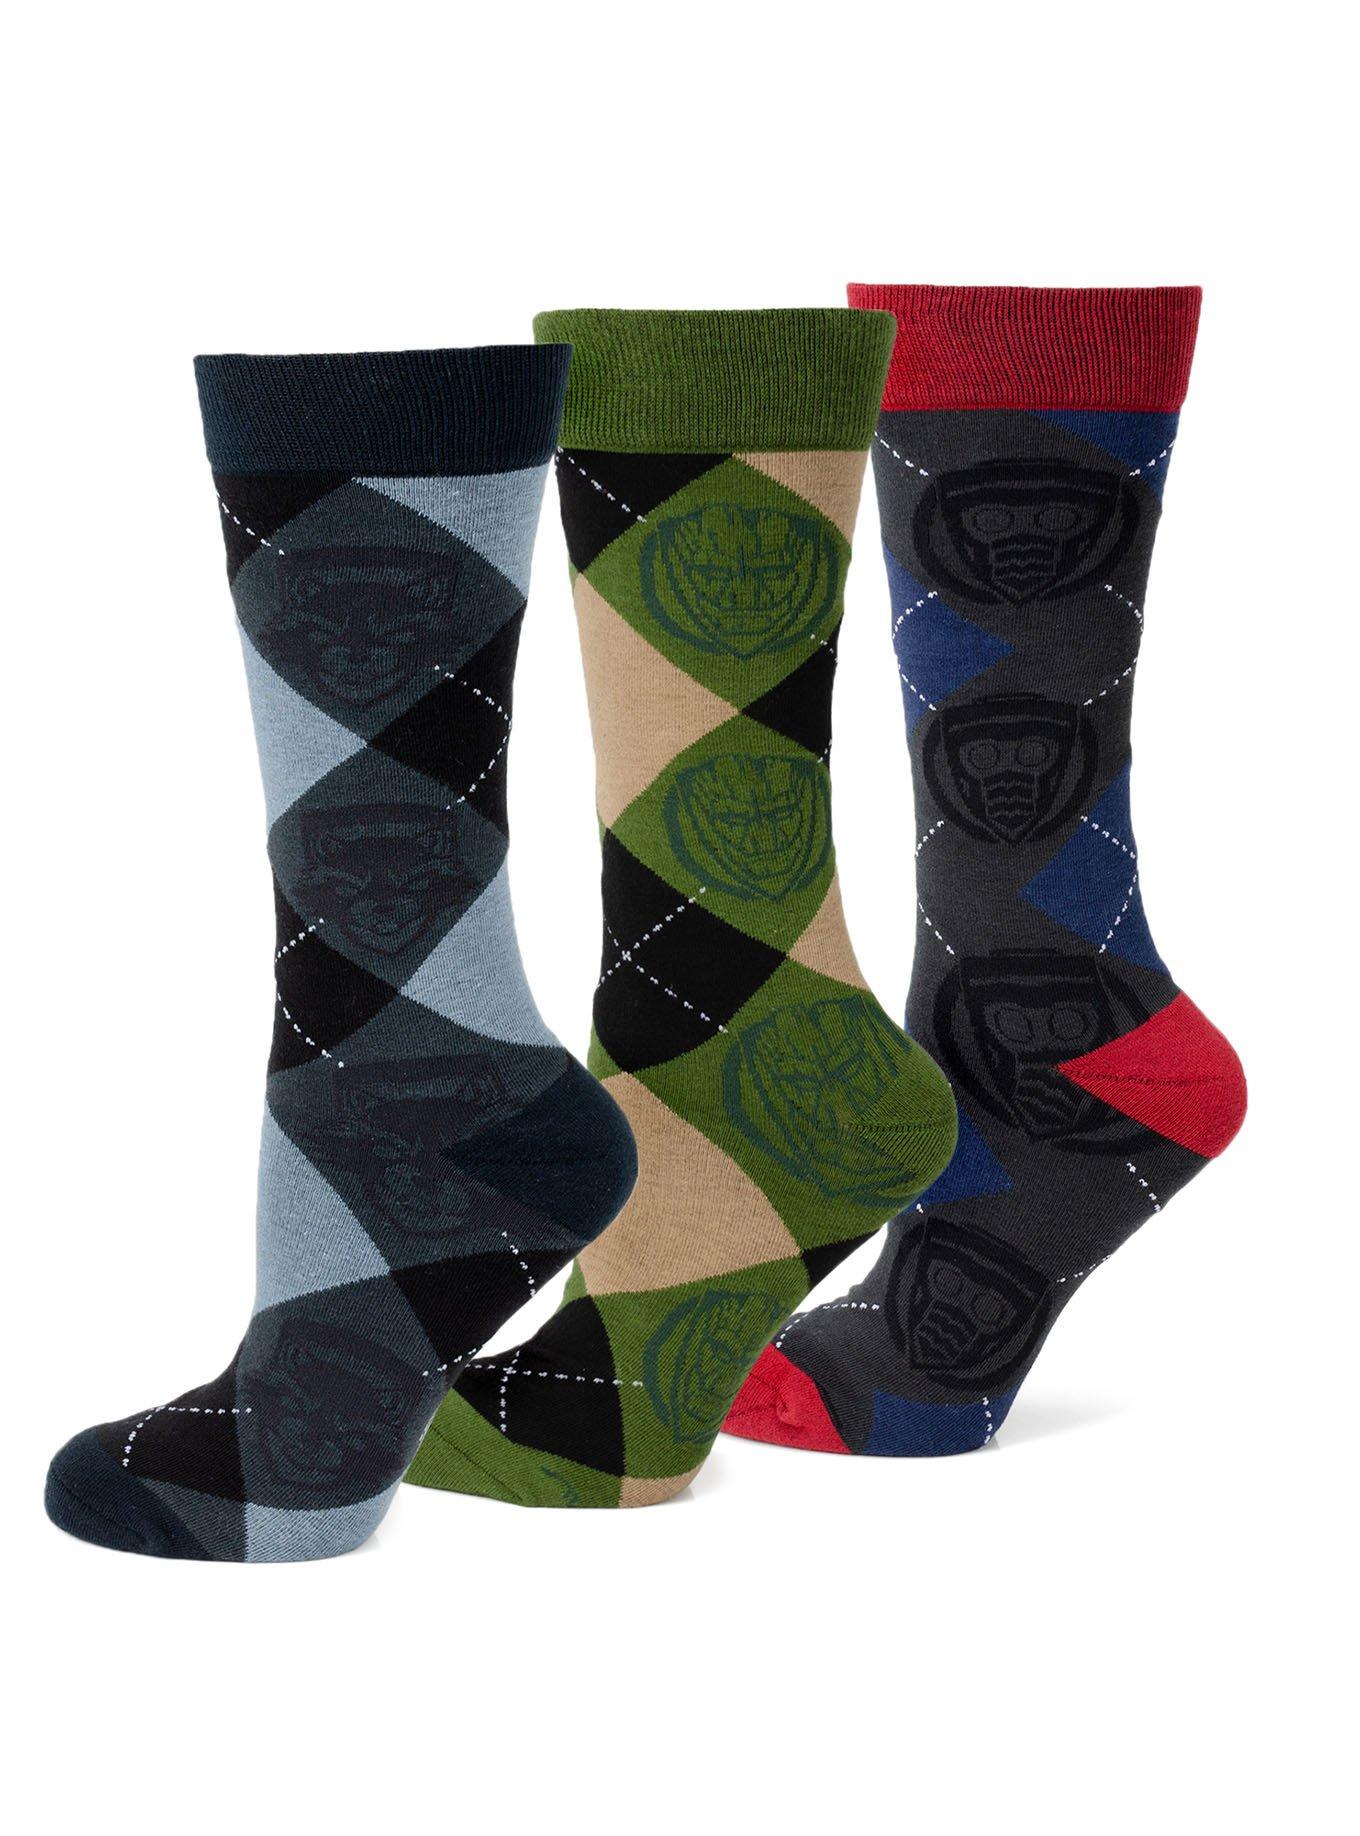 Marvel Guardians of the Galaxy Argyle Sock 3-Pack, , hi-res